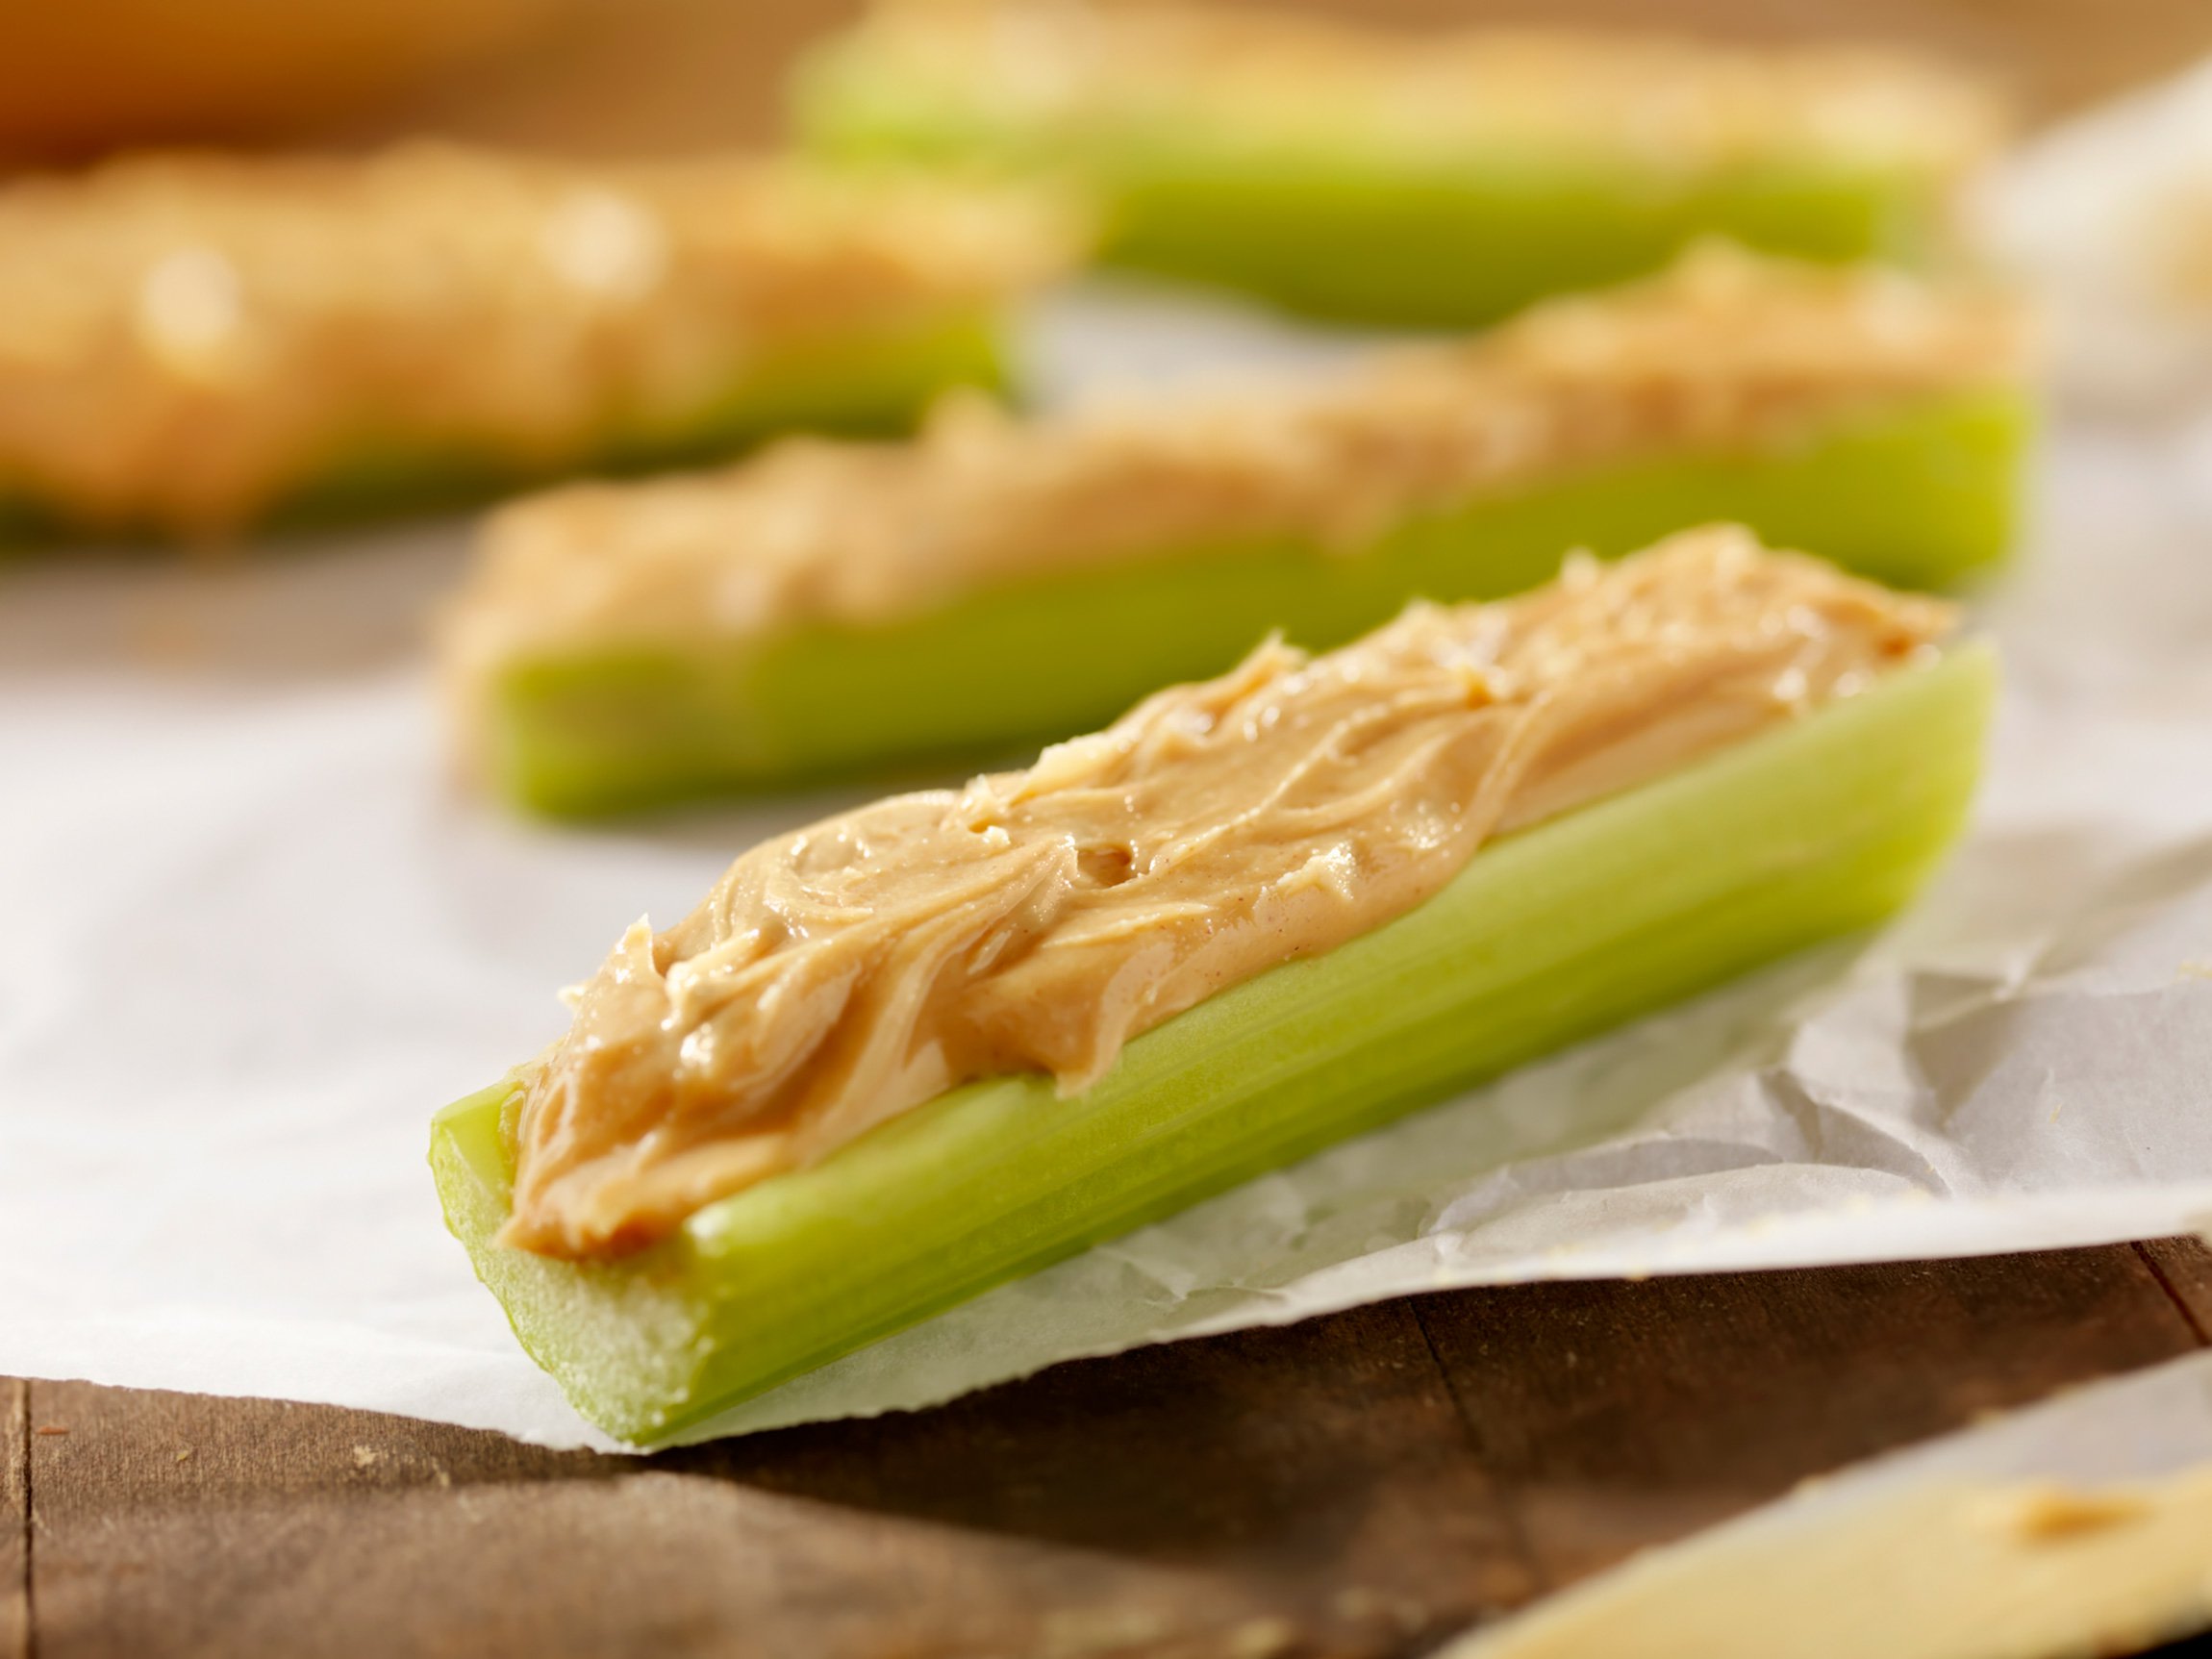 Celery with peanut butter in the middle